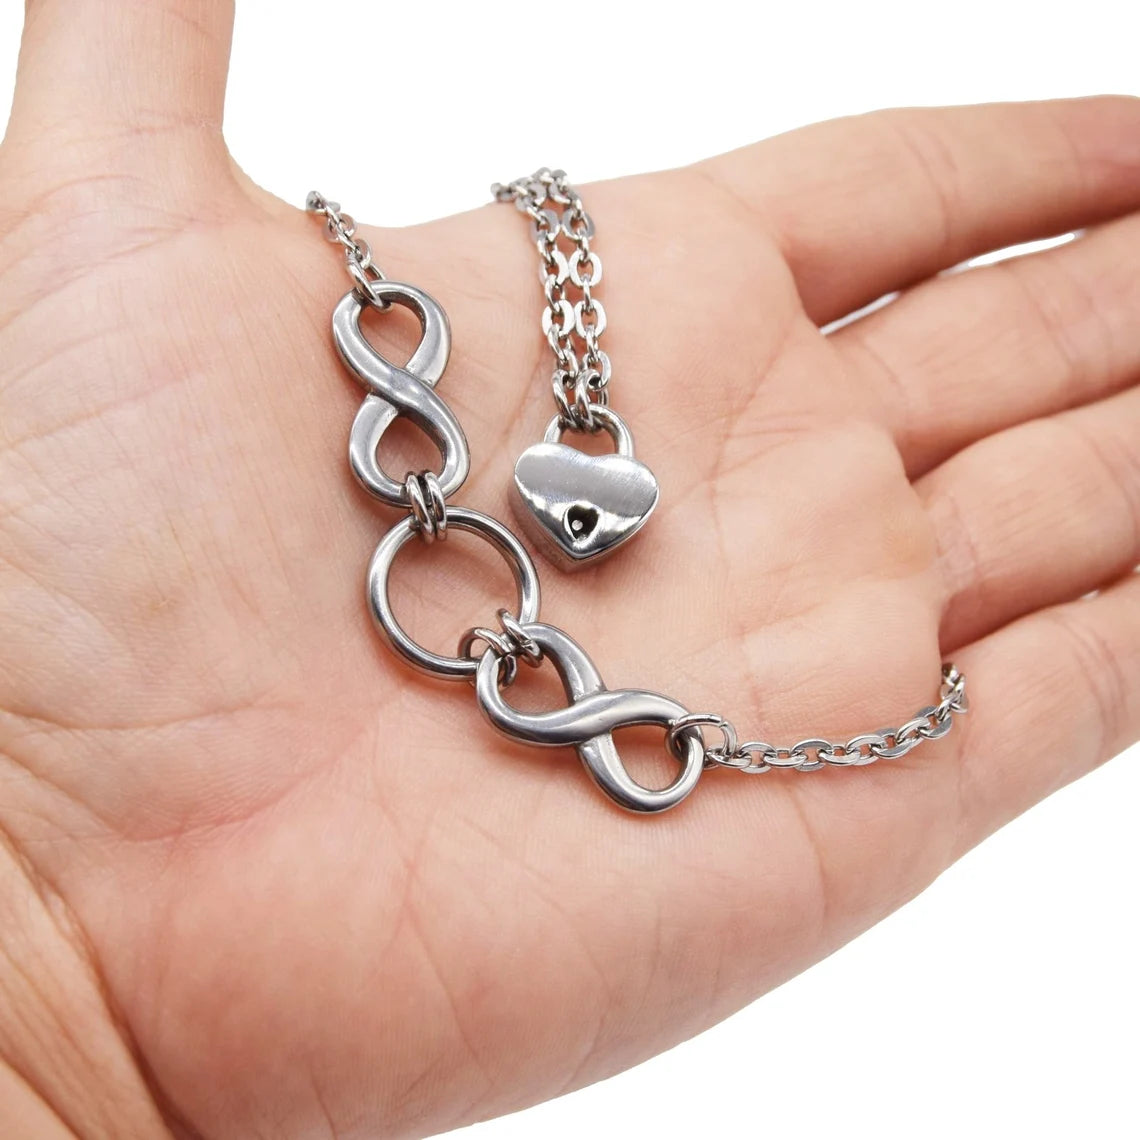 BDSM Locking Day Collar with O ring and Double Infinity on a models hand